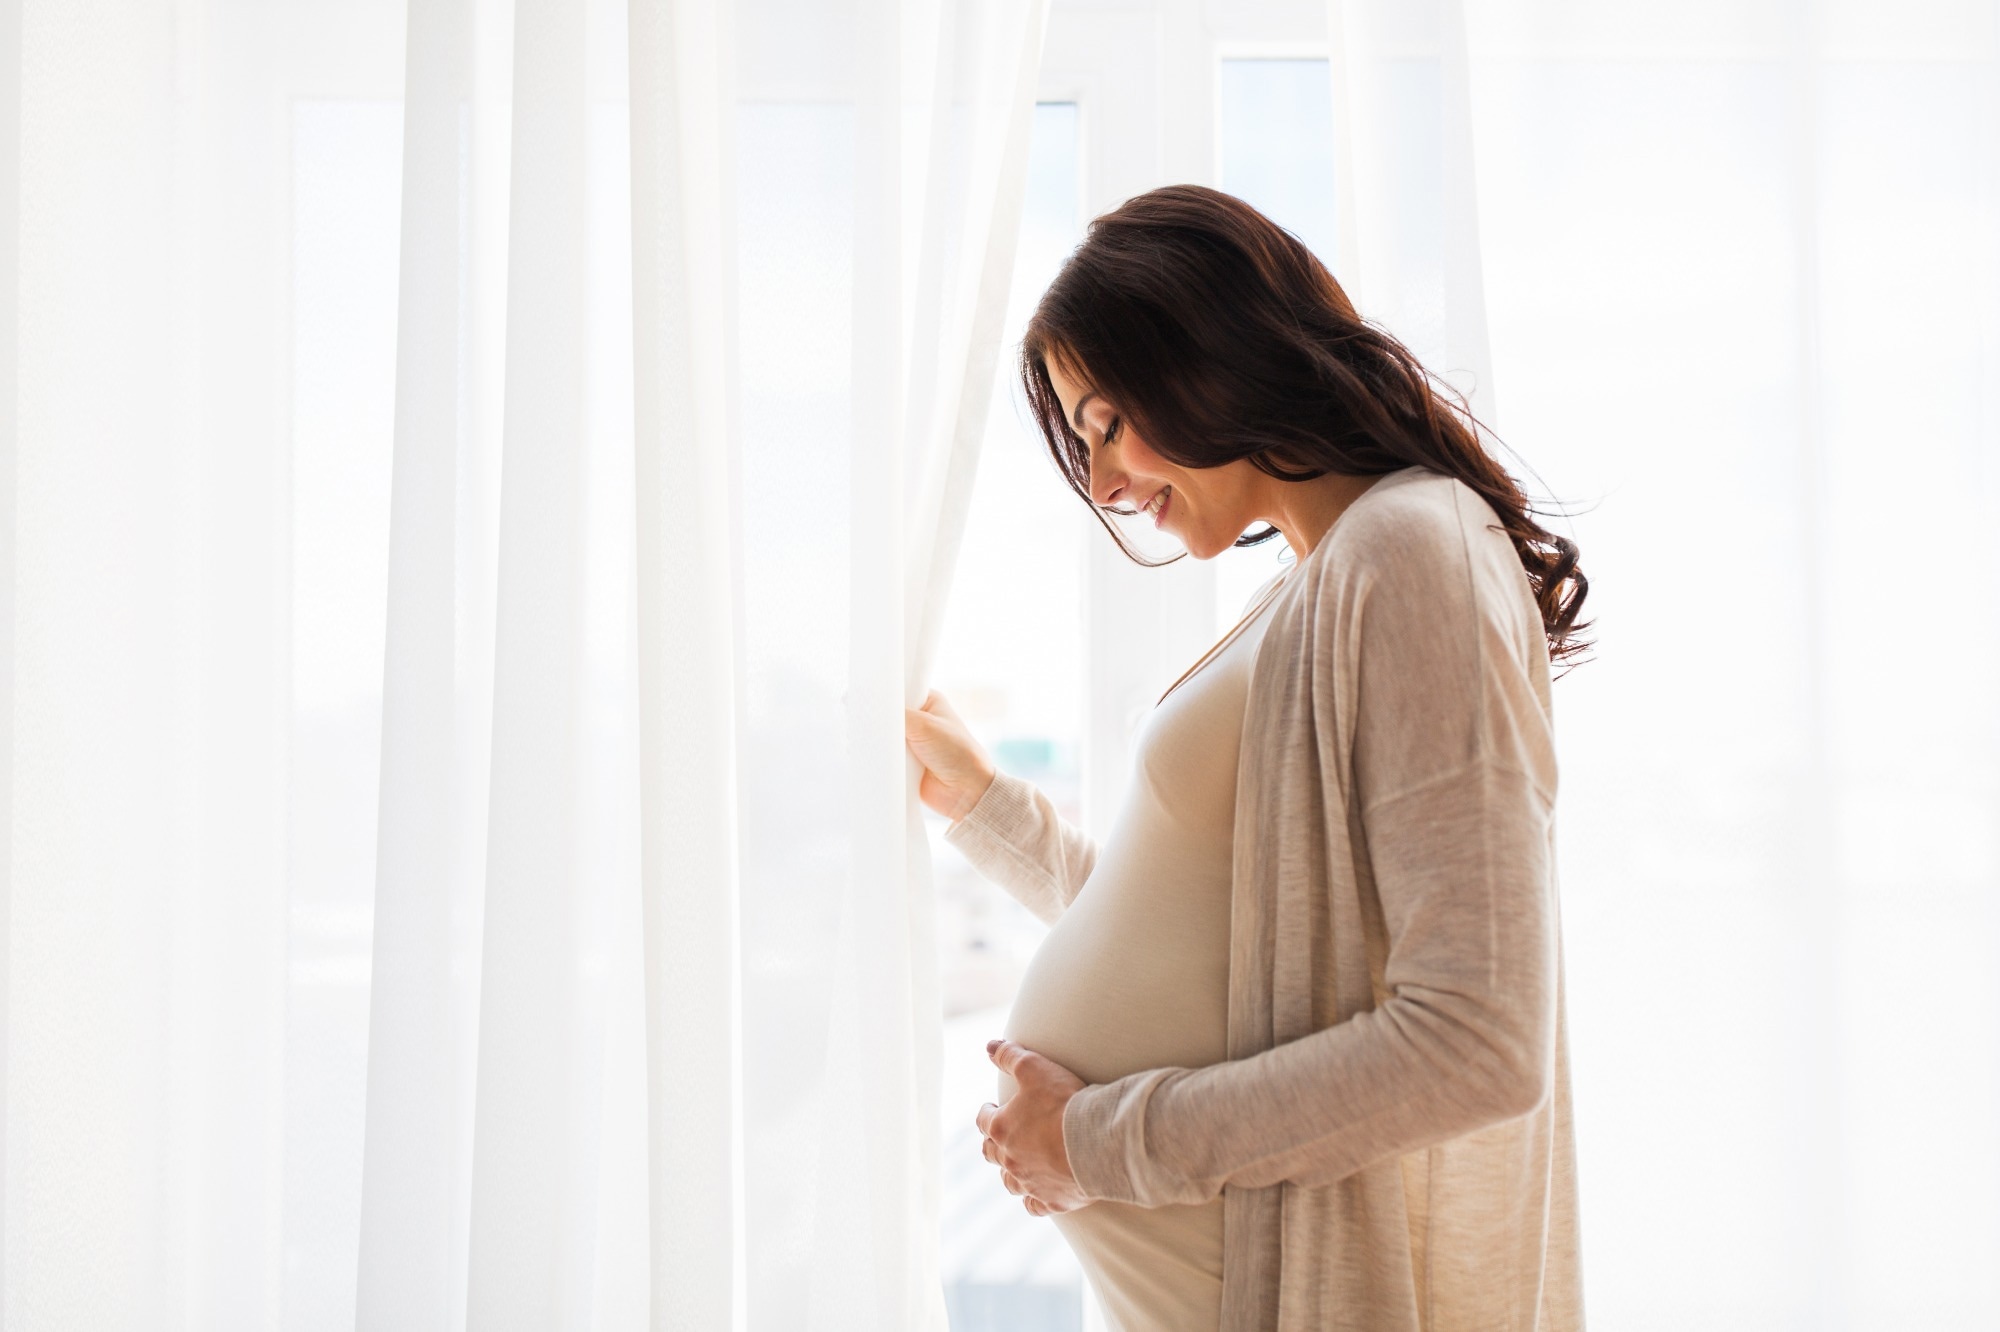 Pregnant women show significant immune system changes linked to gut microbiome